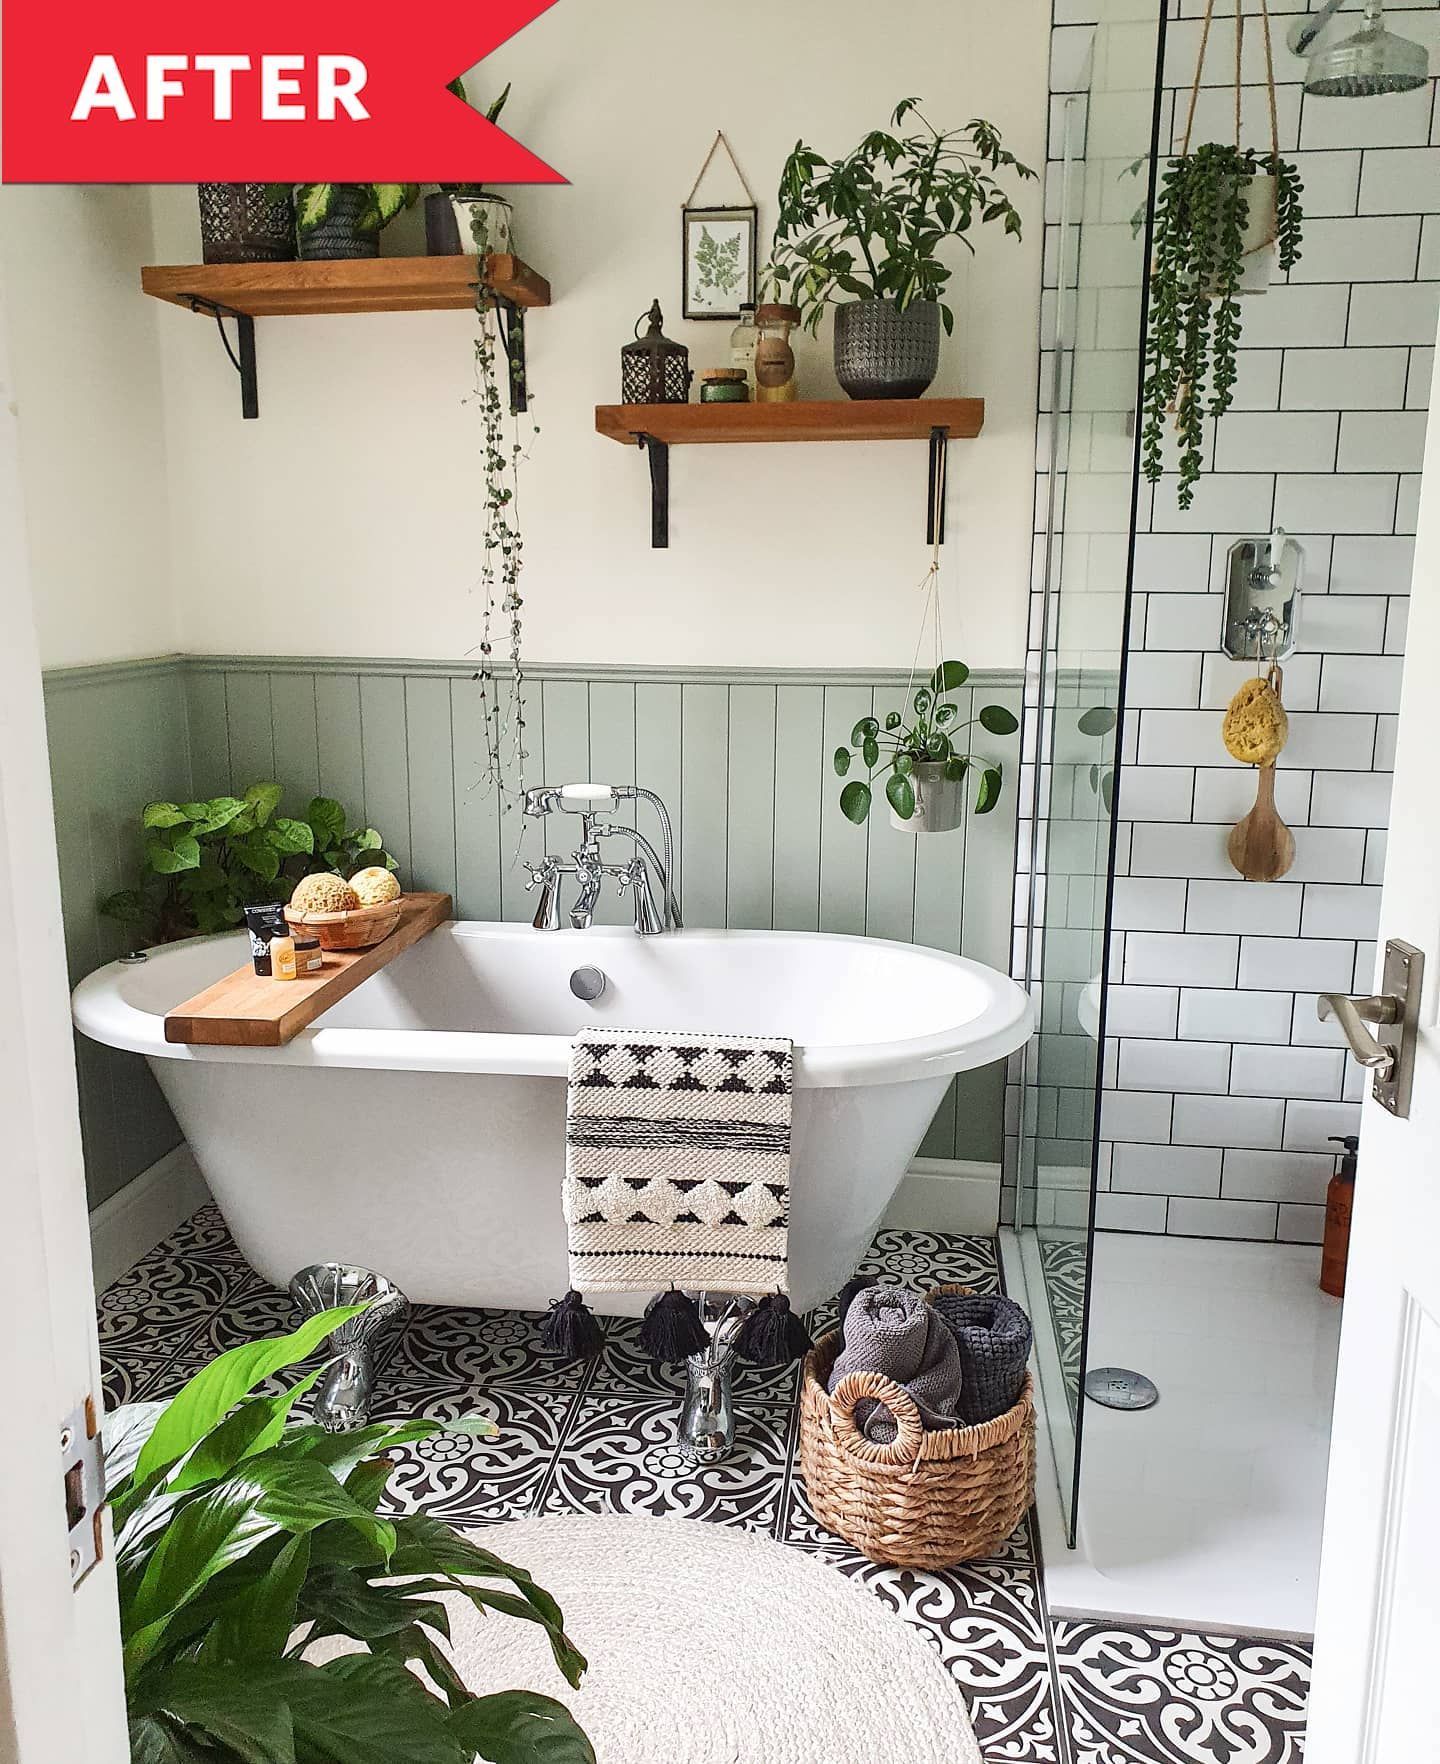 Bathroom Designs: Transform Your Space with Innovative Ideas